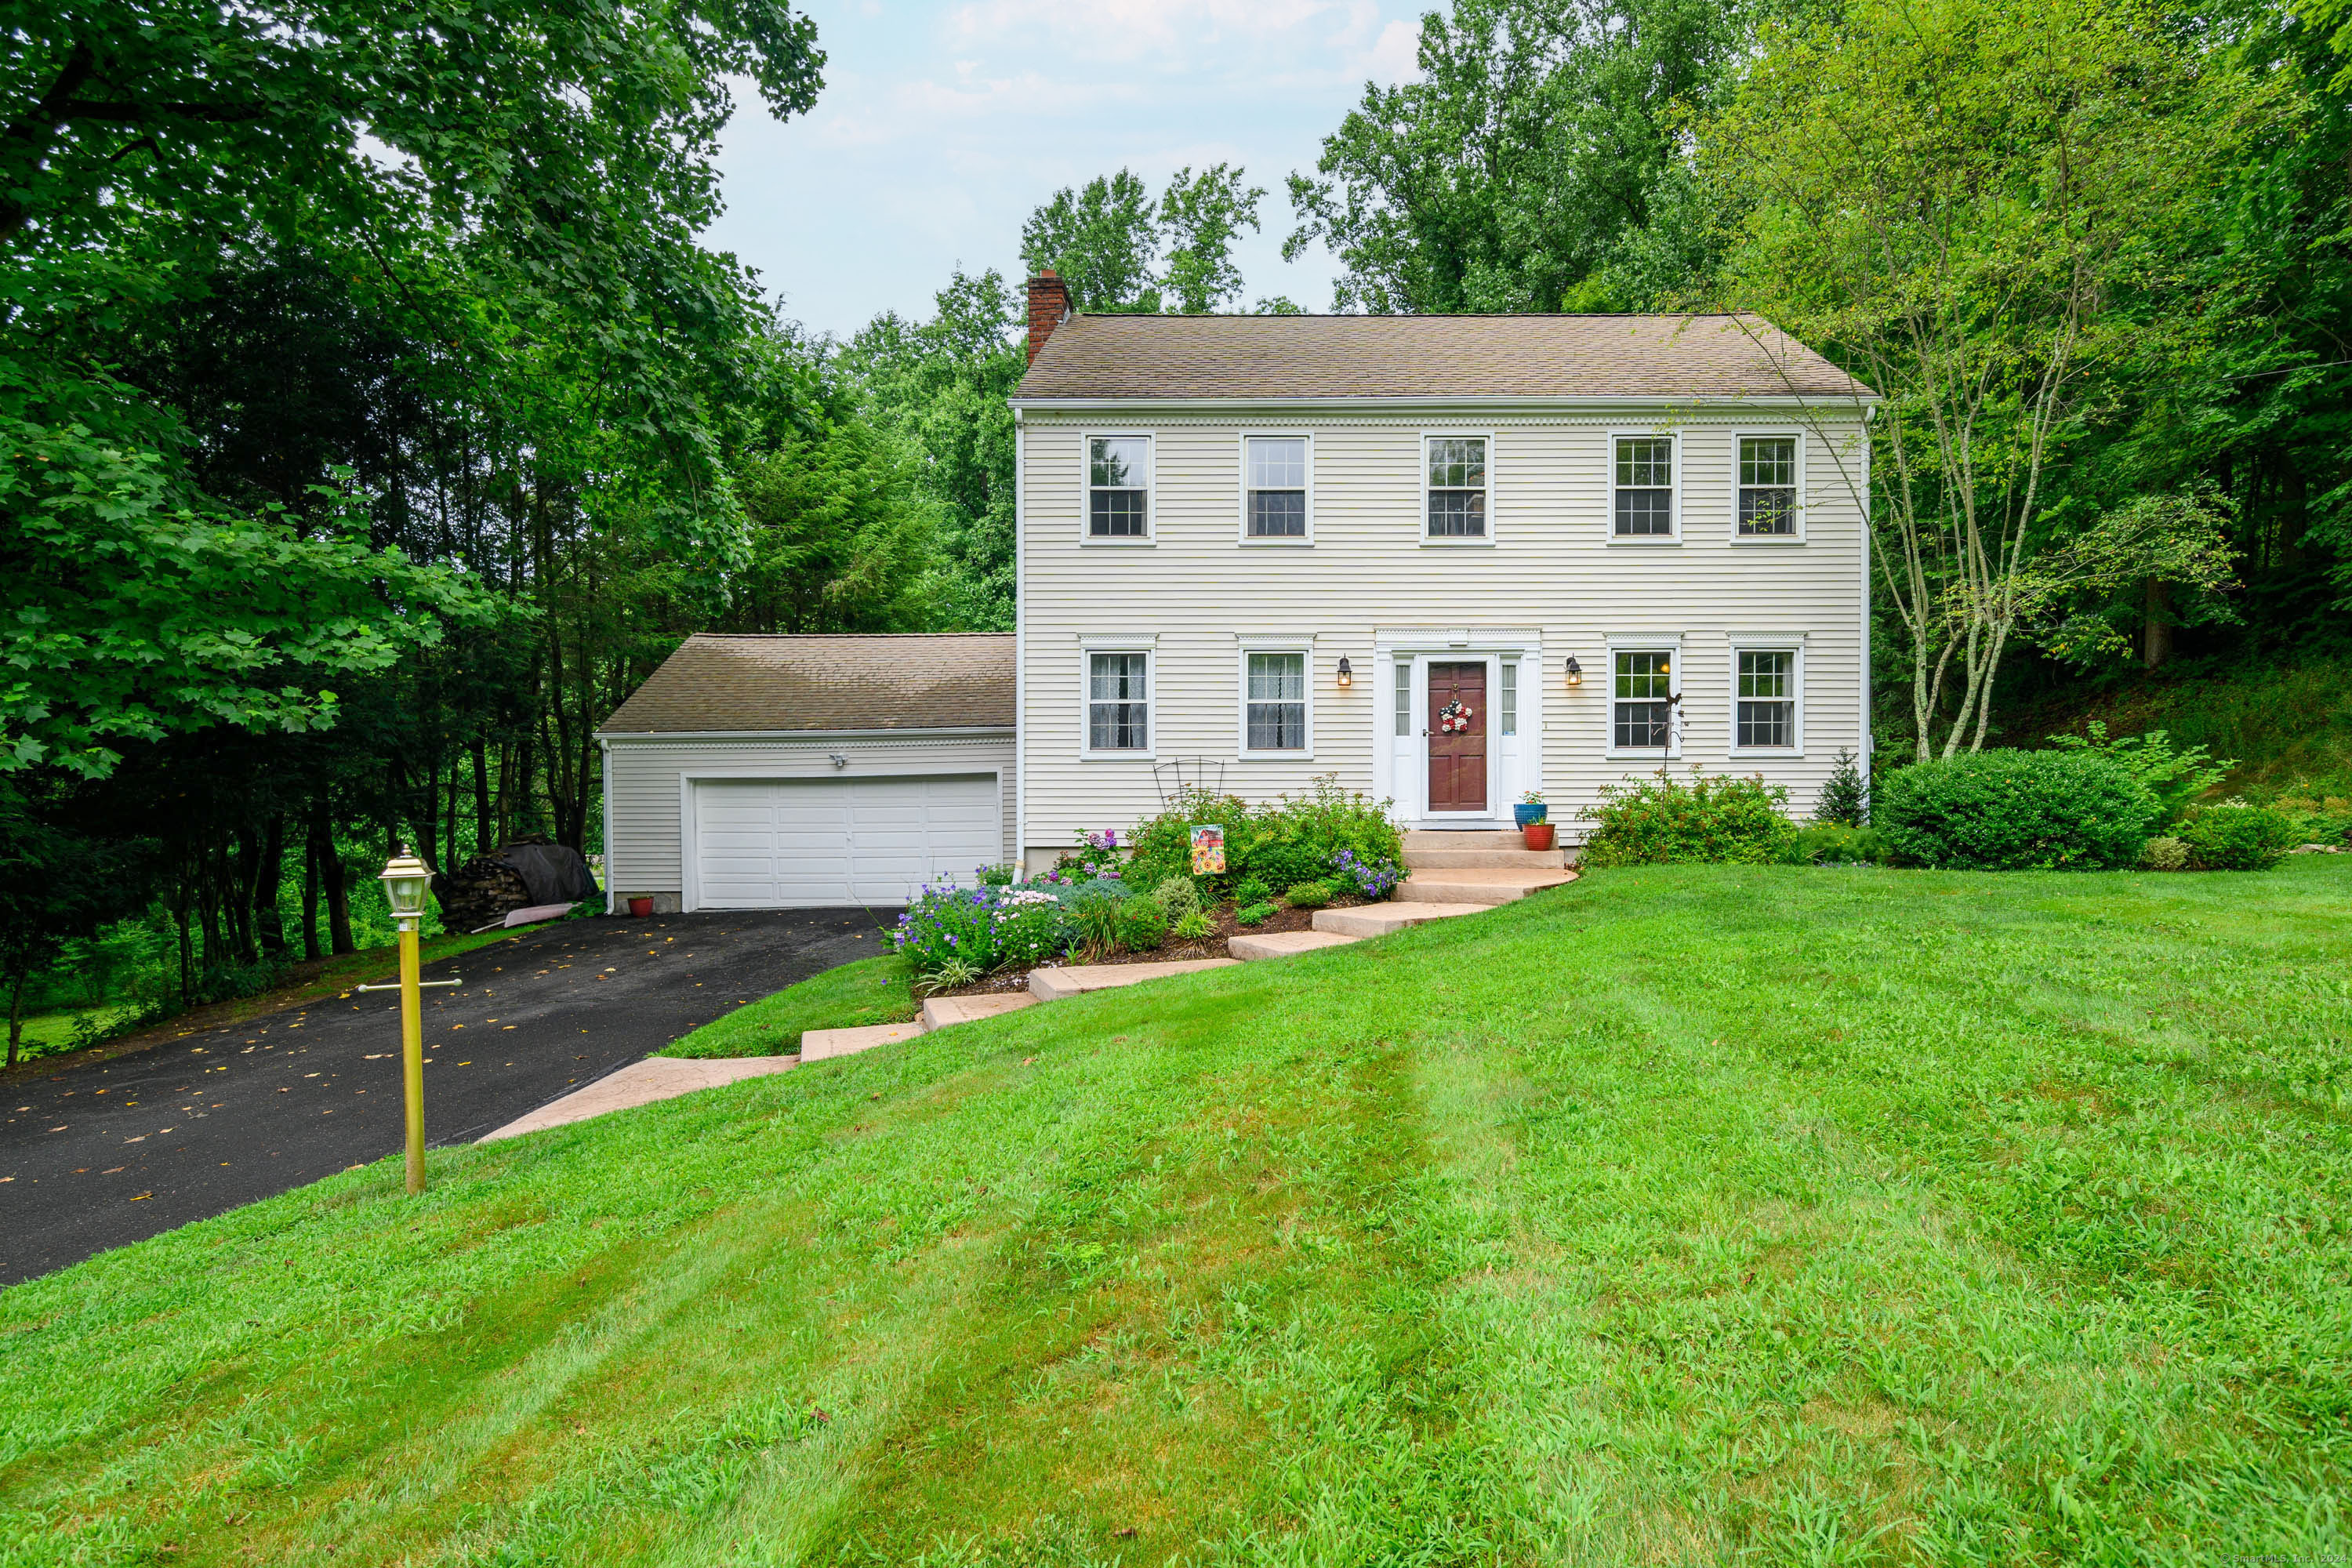 28 Highpoint, Woodbury, Connecticut 06798